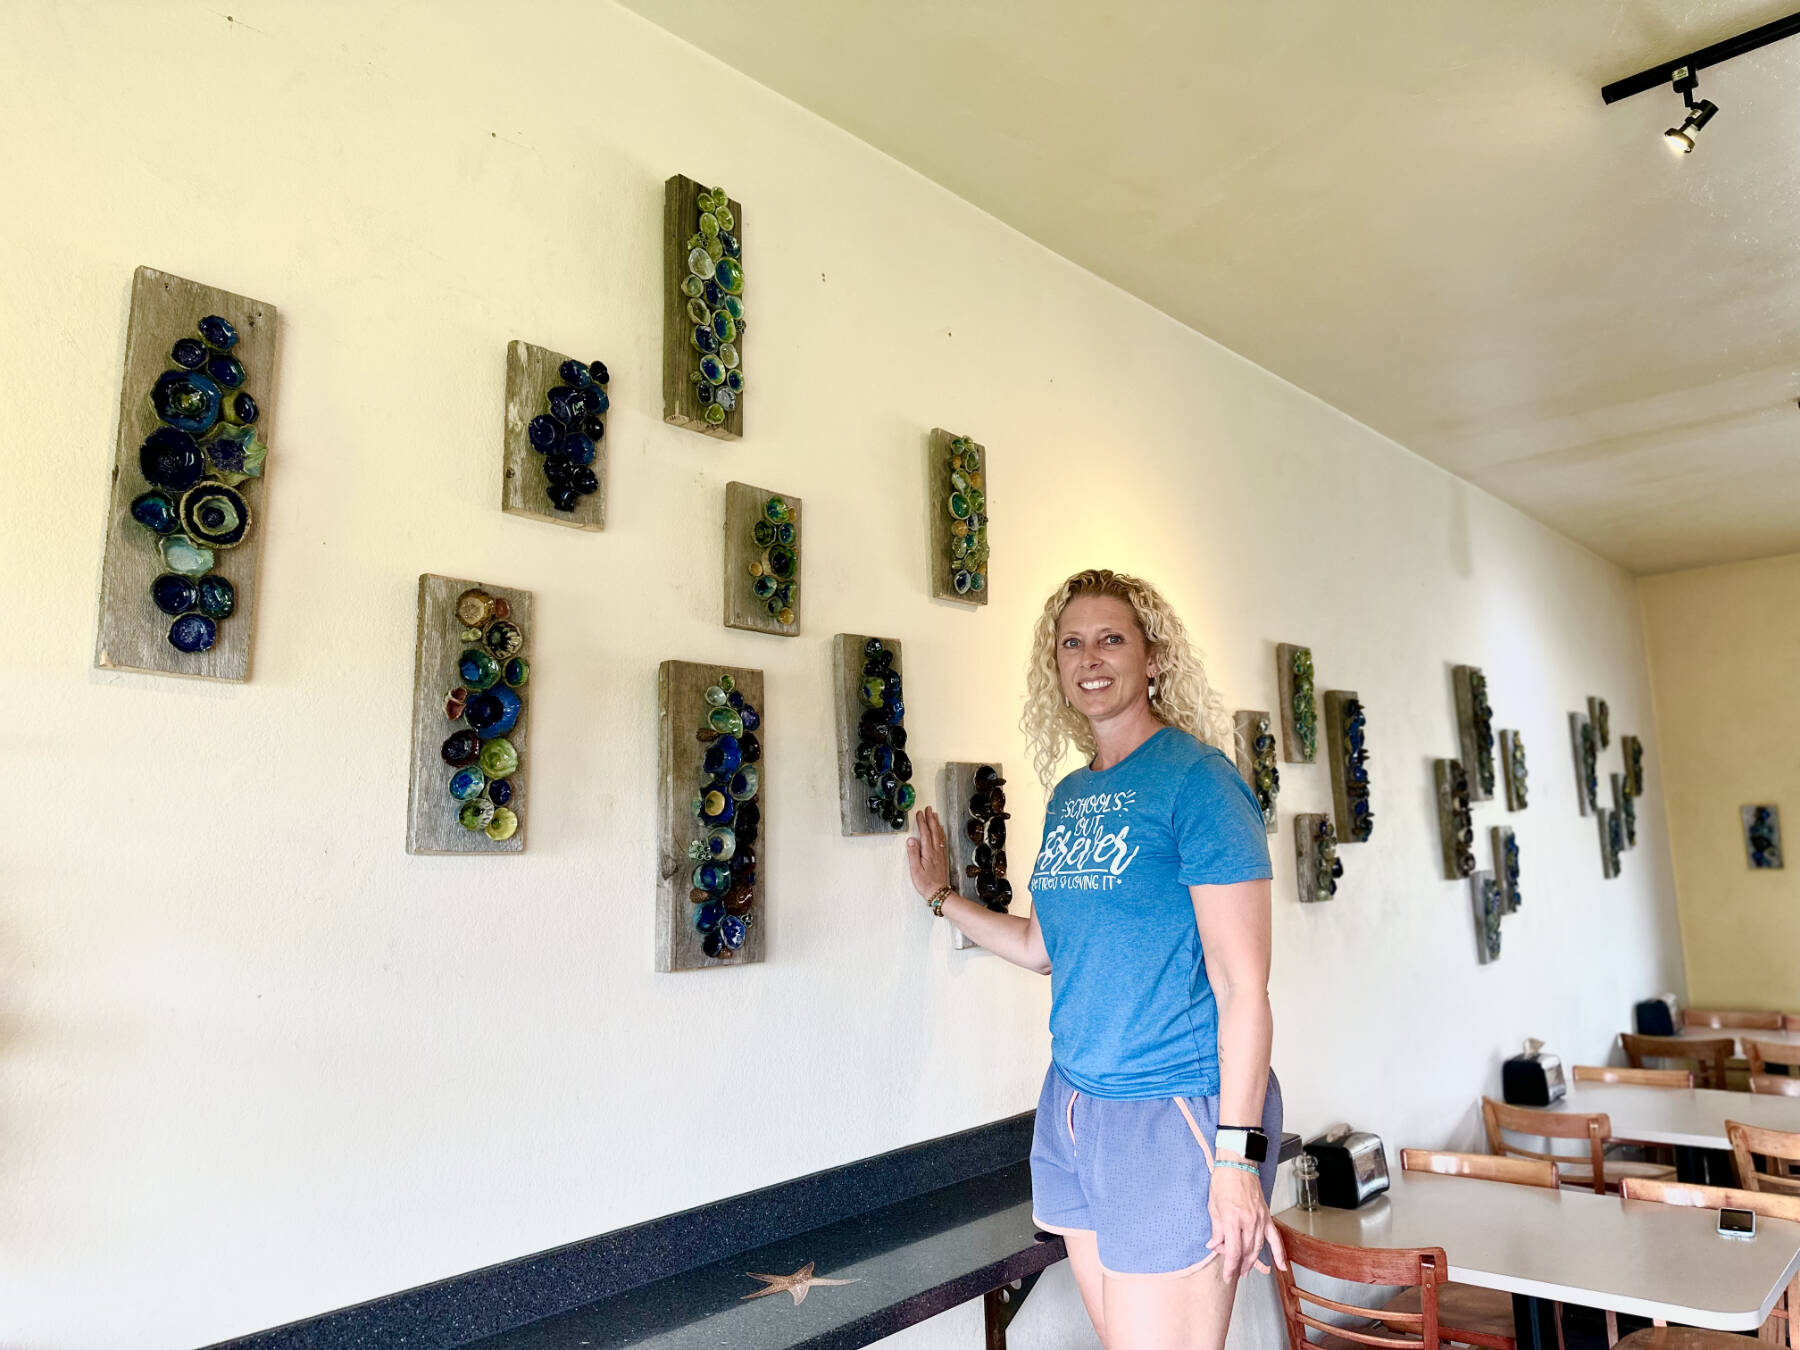 Artist Krista Etzwiler hangs her ceramic pinch pots on reclaimed wood at The Bagel Shop on East End Road in August in Homer, Alaska. (Photo provided by Krista Etzwiler)